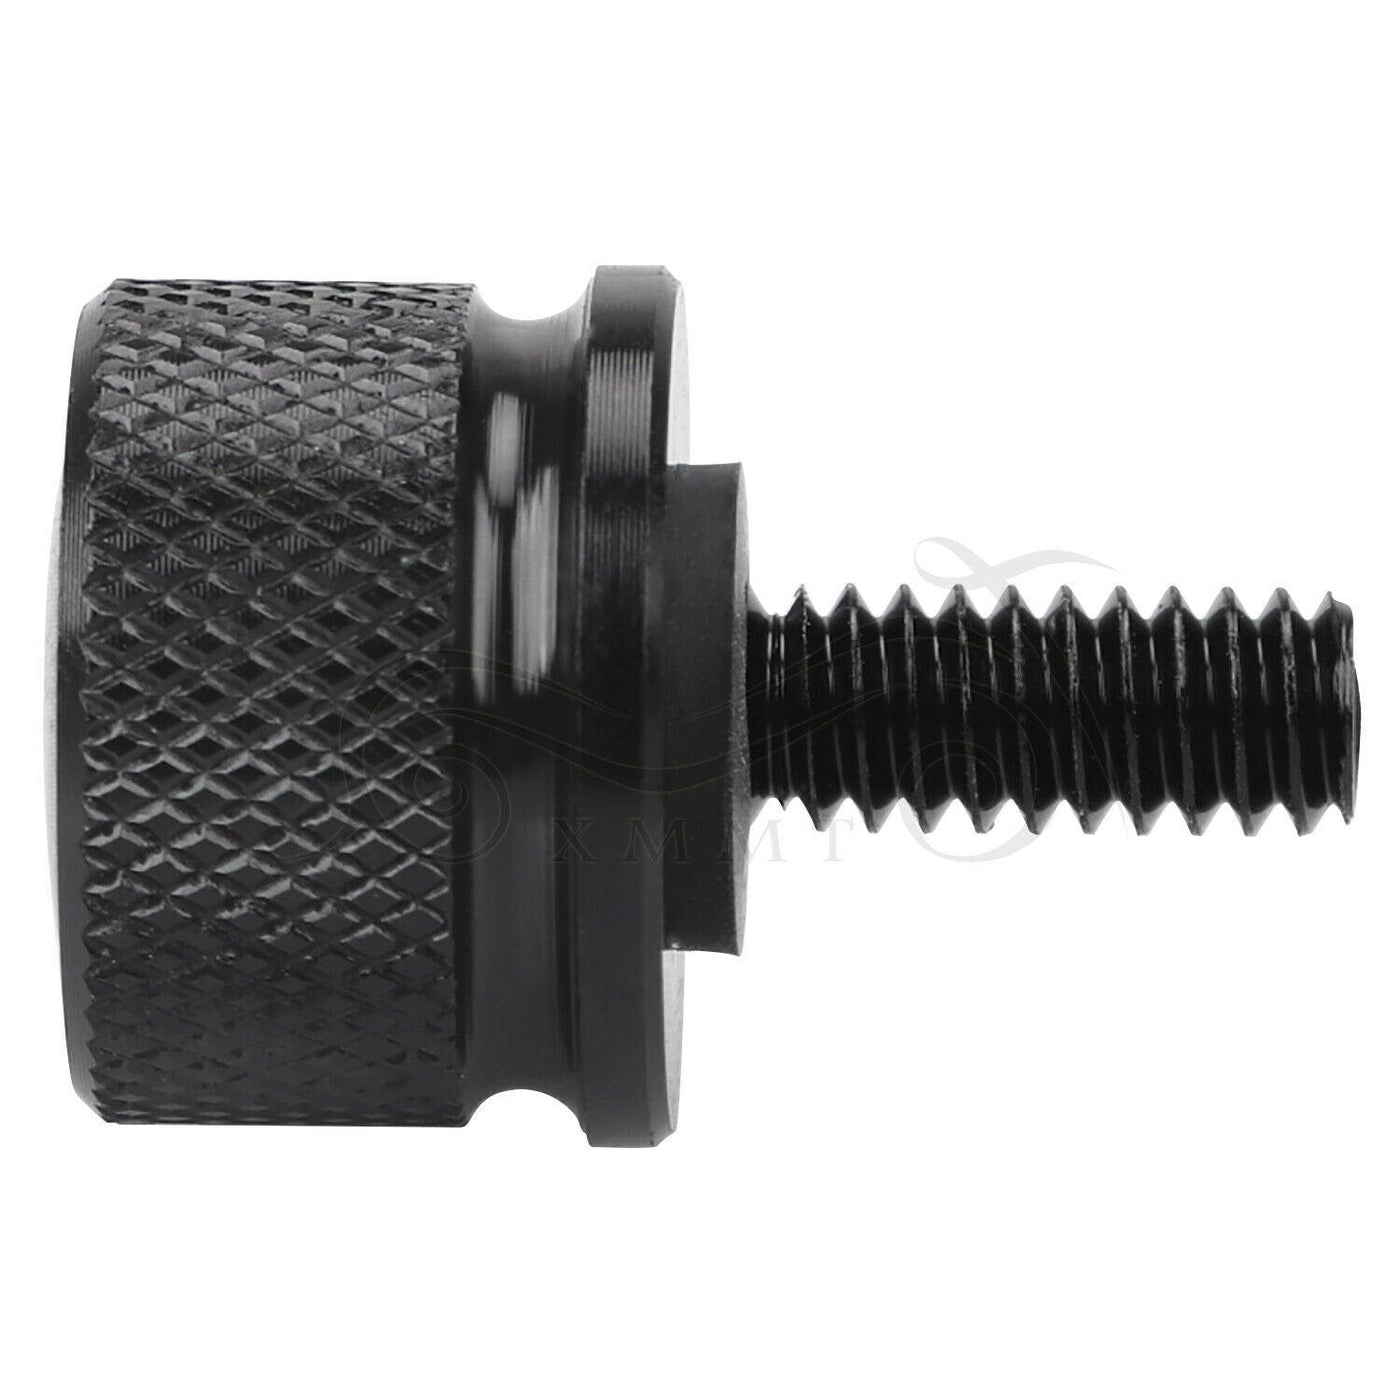 Black Rear Fender Seat Bolt Screw Fit For Harley Touring Electra Glide Road King - Moto Life Products